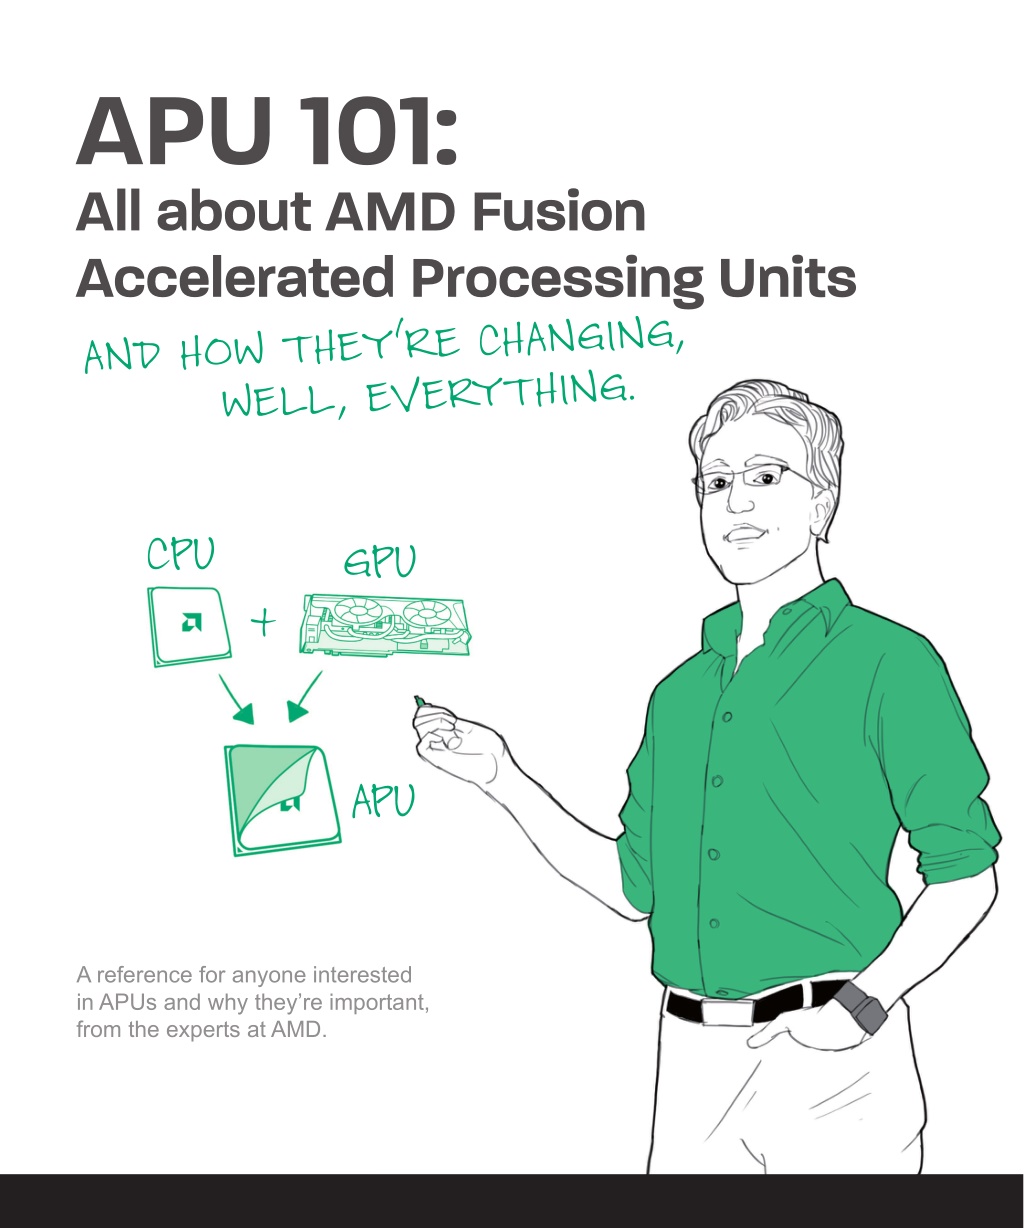 apu-101-all-about-amd-fusion-accelerated-l.jpg